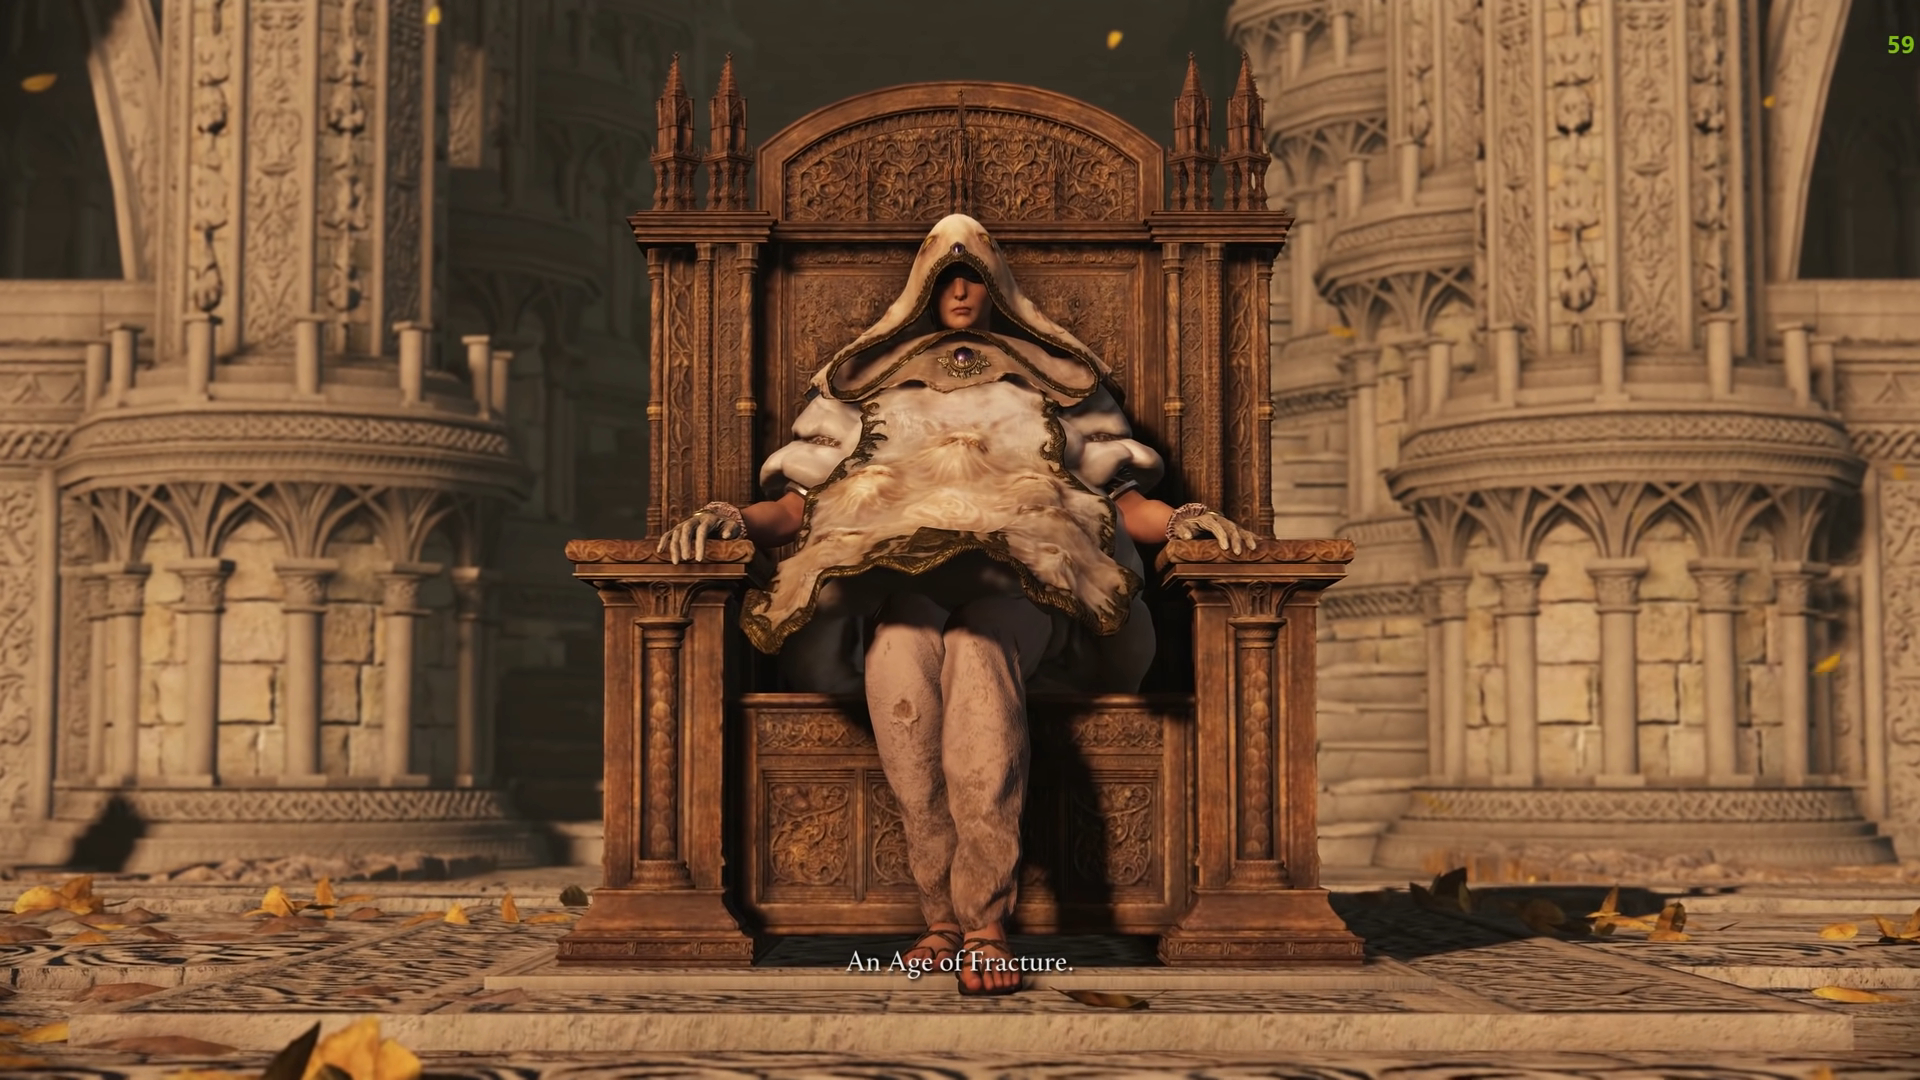 A person sitting on a throne in a big coat.